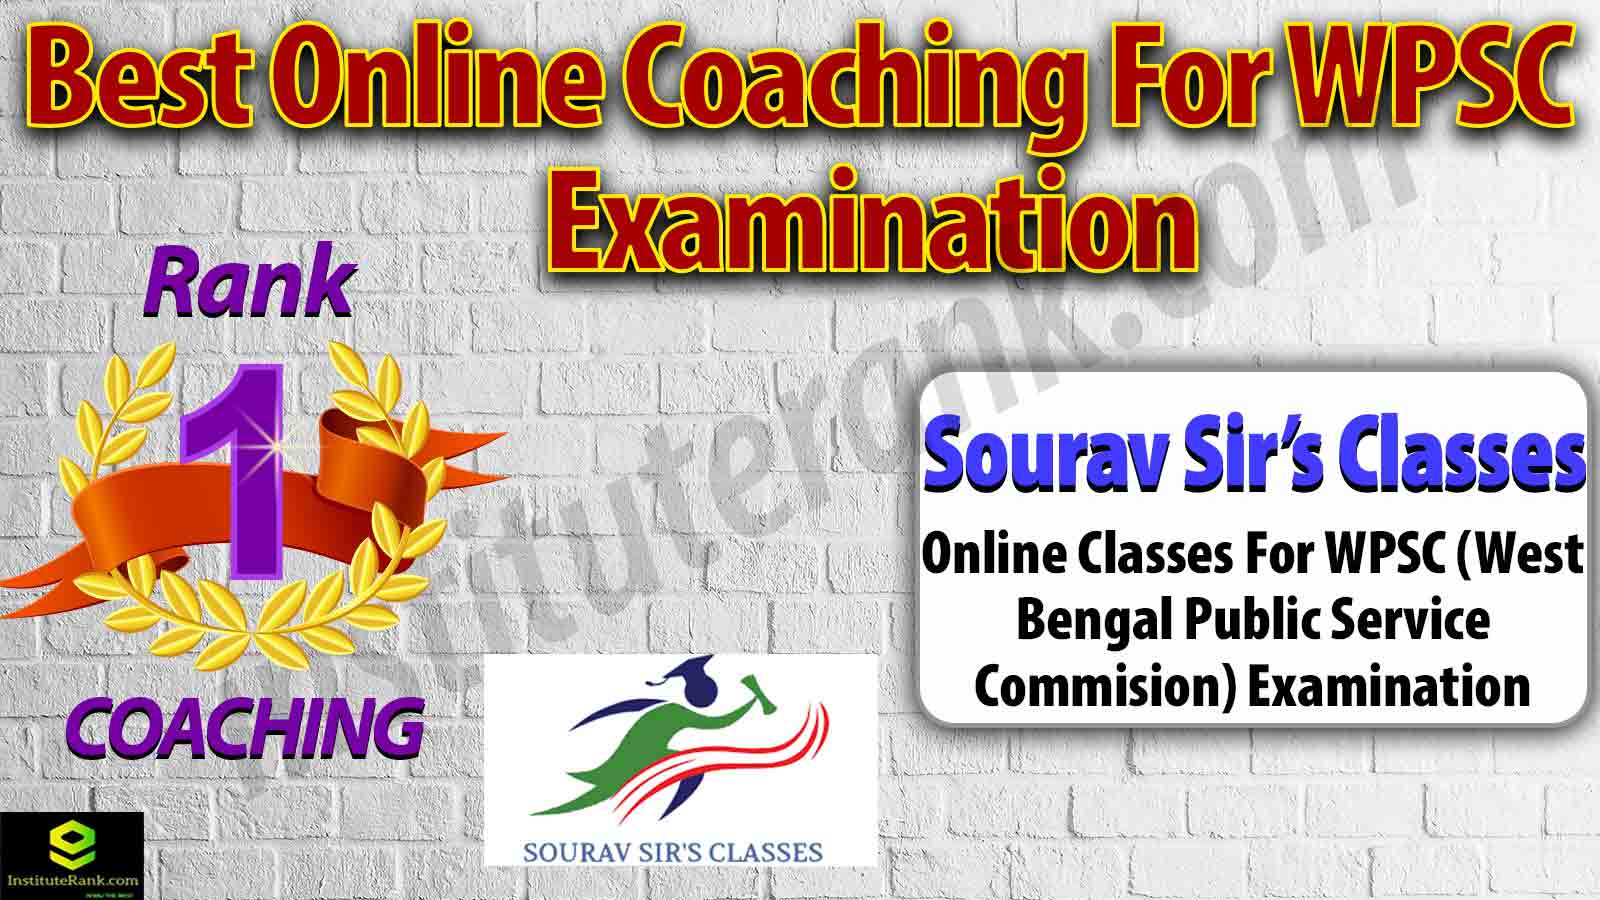 Best Online Coaching for WBPSC Examination